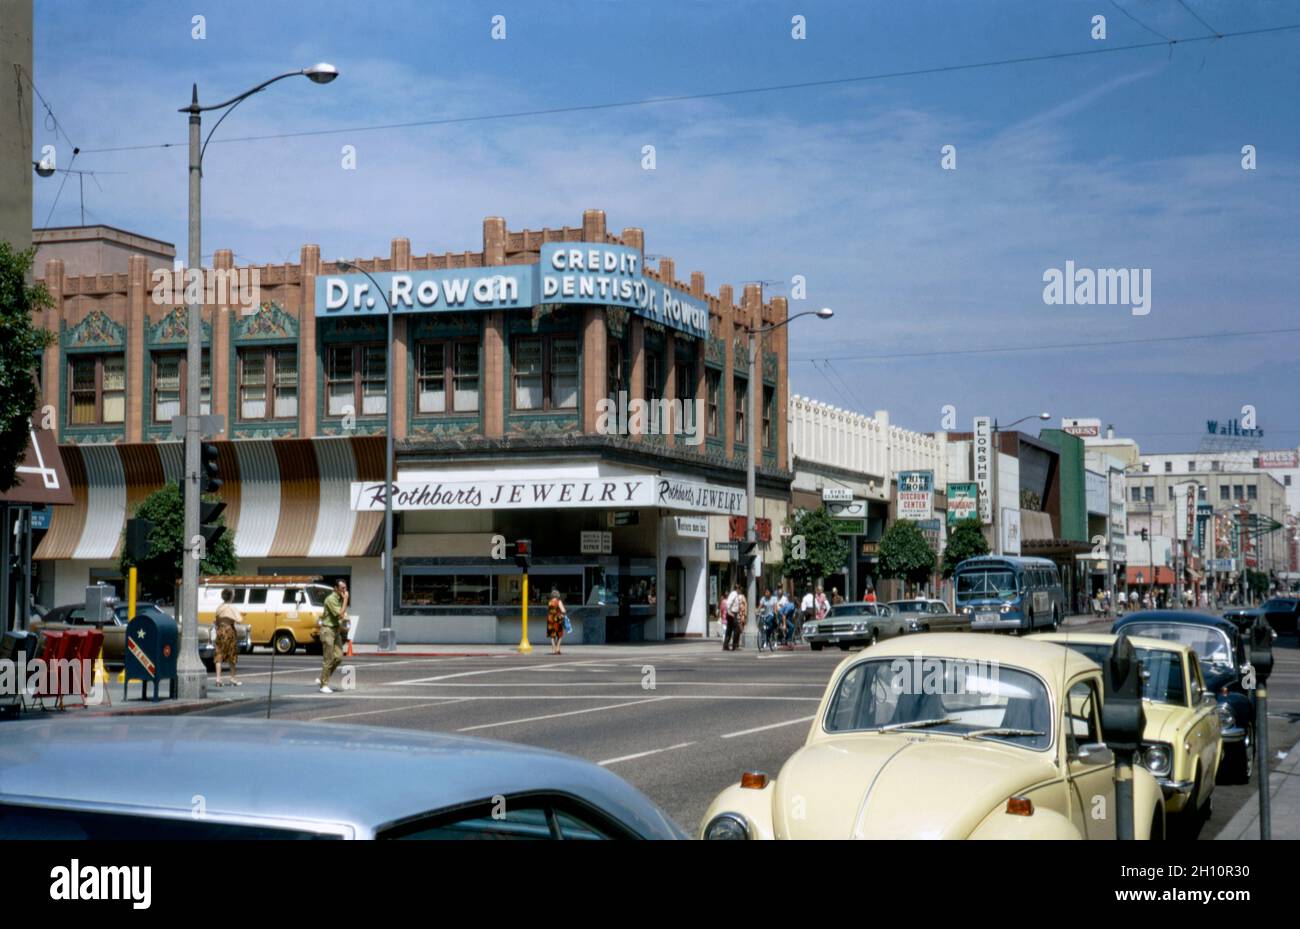 A view looking down Pine Avenue, Long Beach, California, USA in 1972. The city is located within the Los Angeles metropolitan area. This is one of the main shopping streets downtown. Many of the older buildings still remain, including the one on the corner housing a dental practice and jeweller’s shop. This image is from an old American amateur Kodak colour transparency – a vintage 1970s photograph. Stock Photo